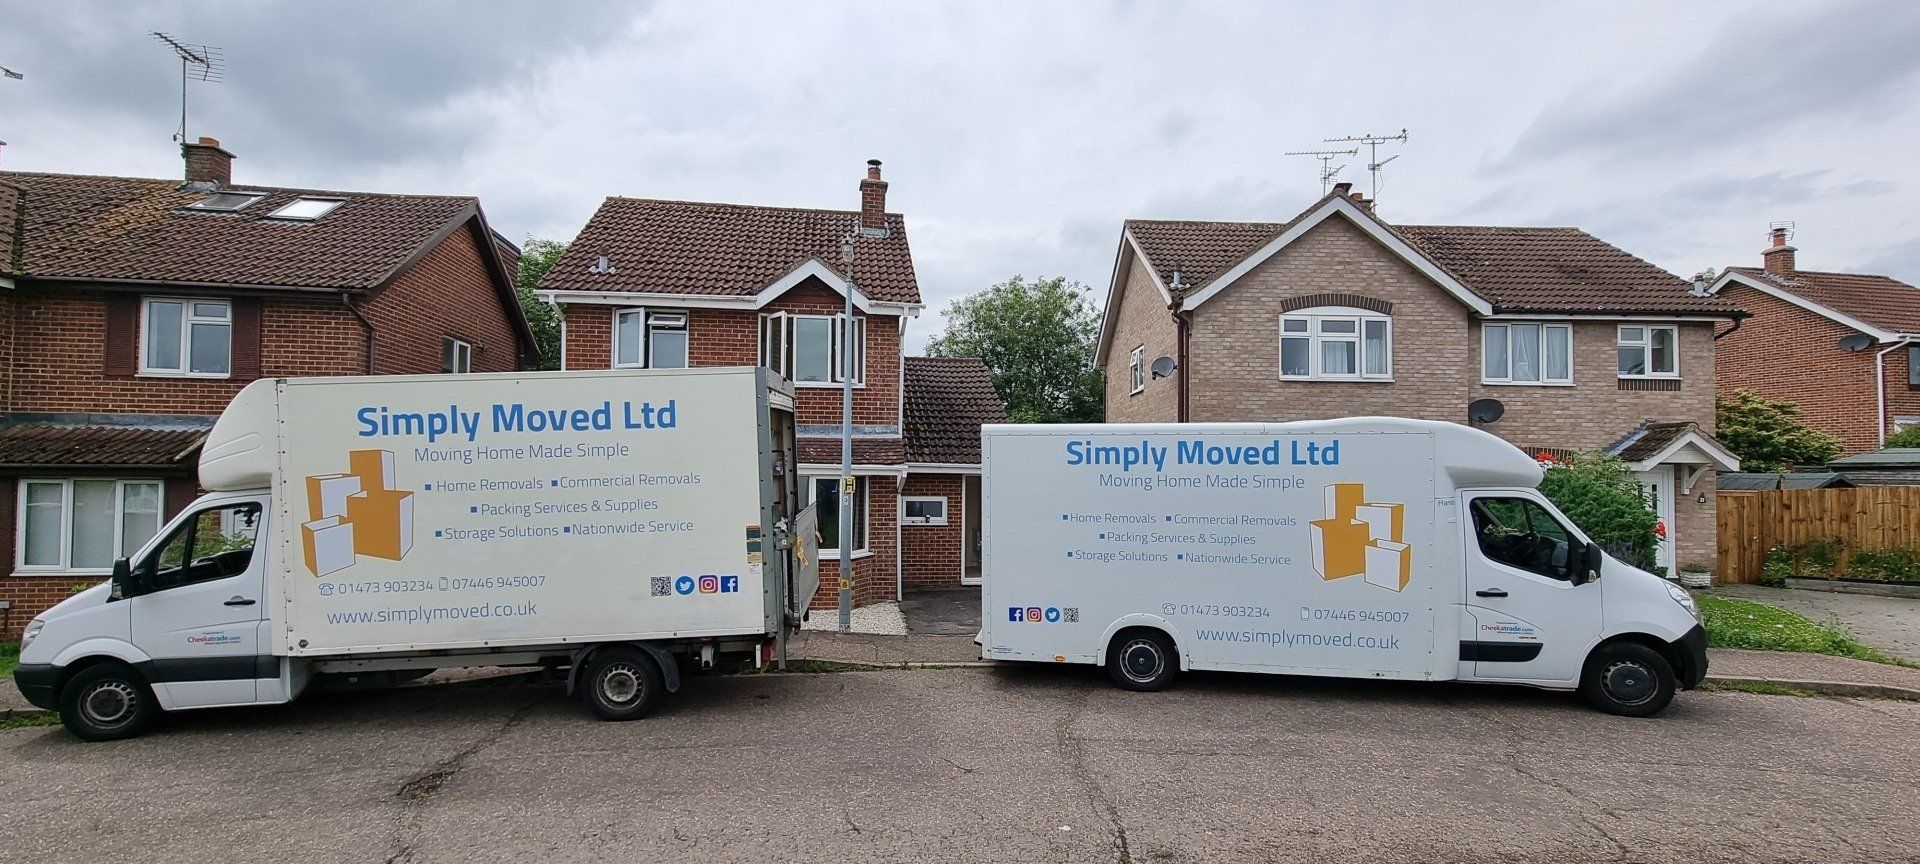 Simply Moved House Move